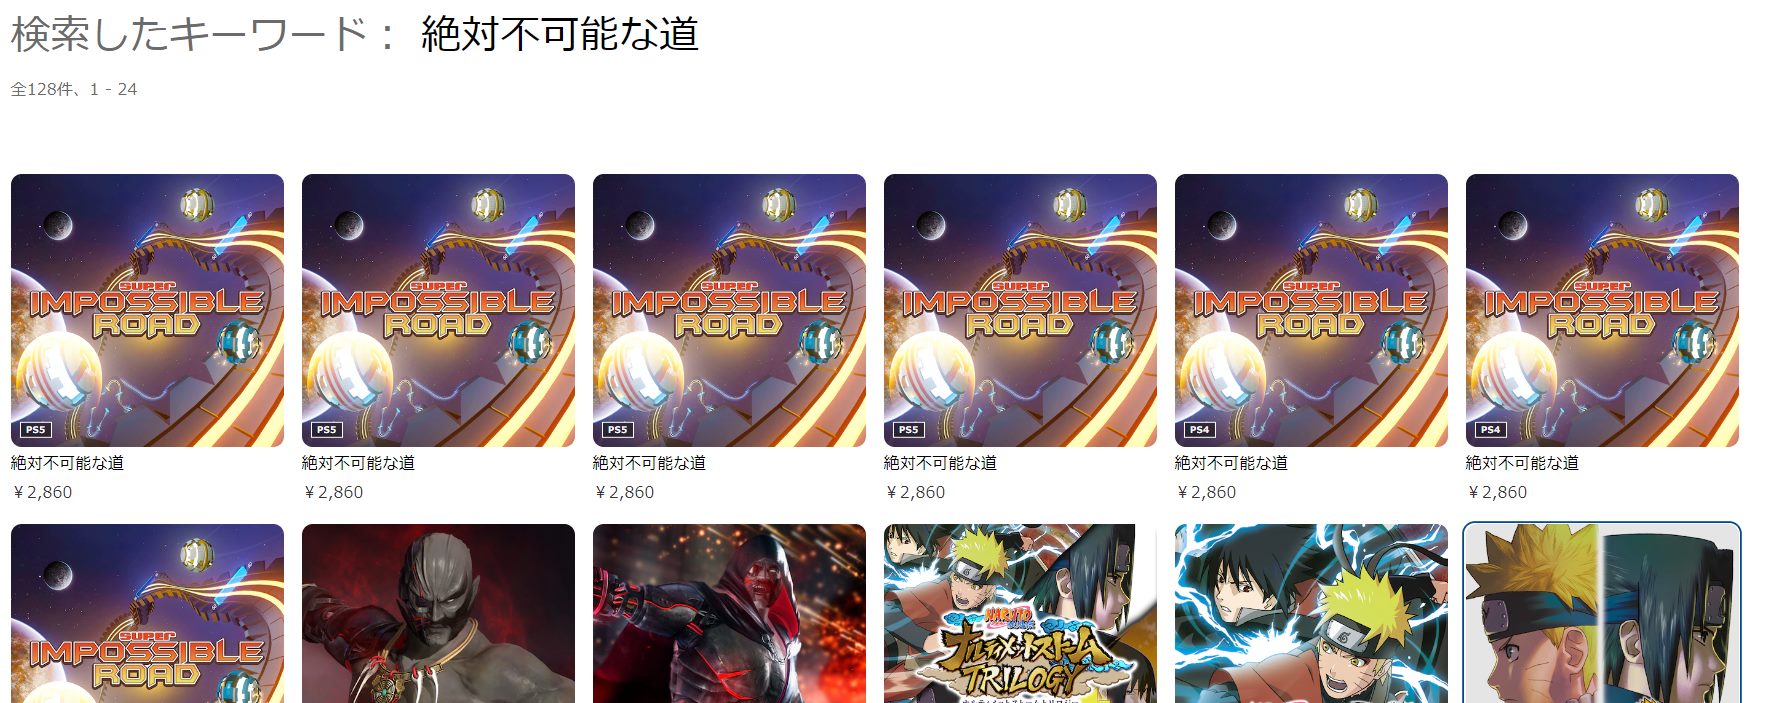 7 copies of the same game mysteriously appear on the PS Store in Japan